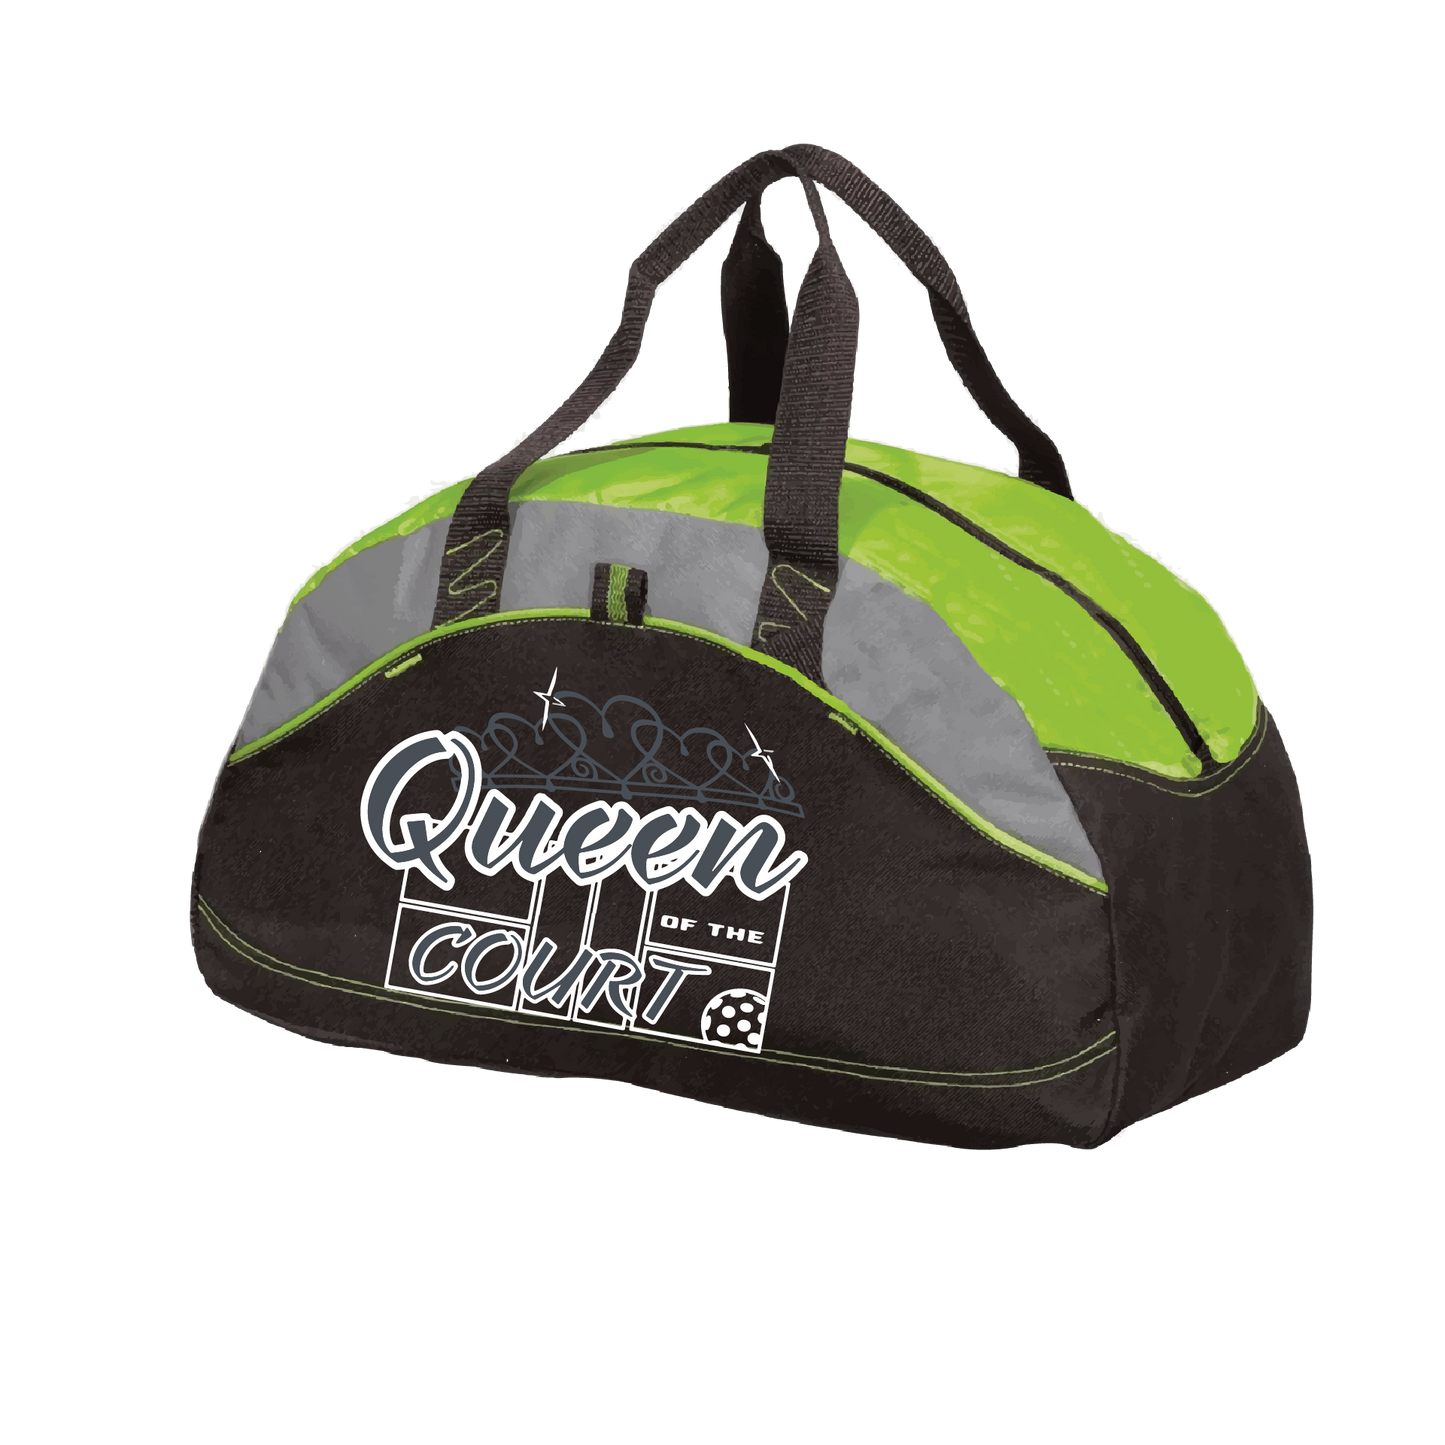 Pickleball Duffel Bag Design: Queen of the Court  Carry your gear in comfort and style. This fun pickleball duffel bag is the perfect accessory for all pickleball players needing to keep their gear in one place. This medium sized duffel tote is ideal for all your pickleball activities. The large center compartment allows for plenty of space and the mesh end pocket is perfect for holding a water bottle. 